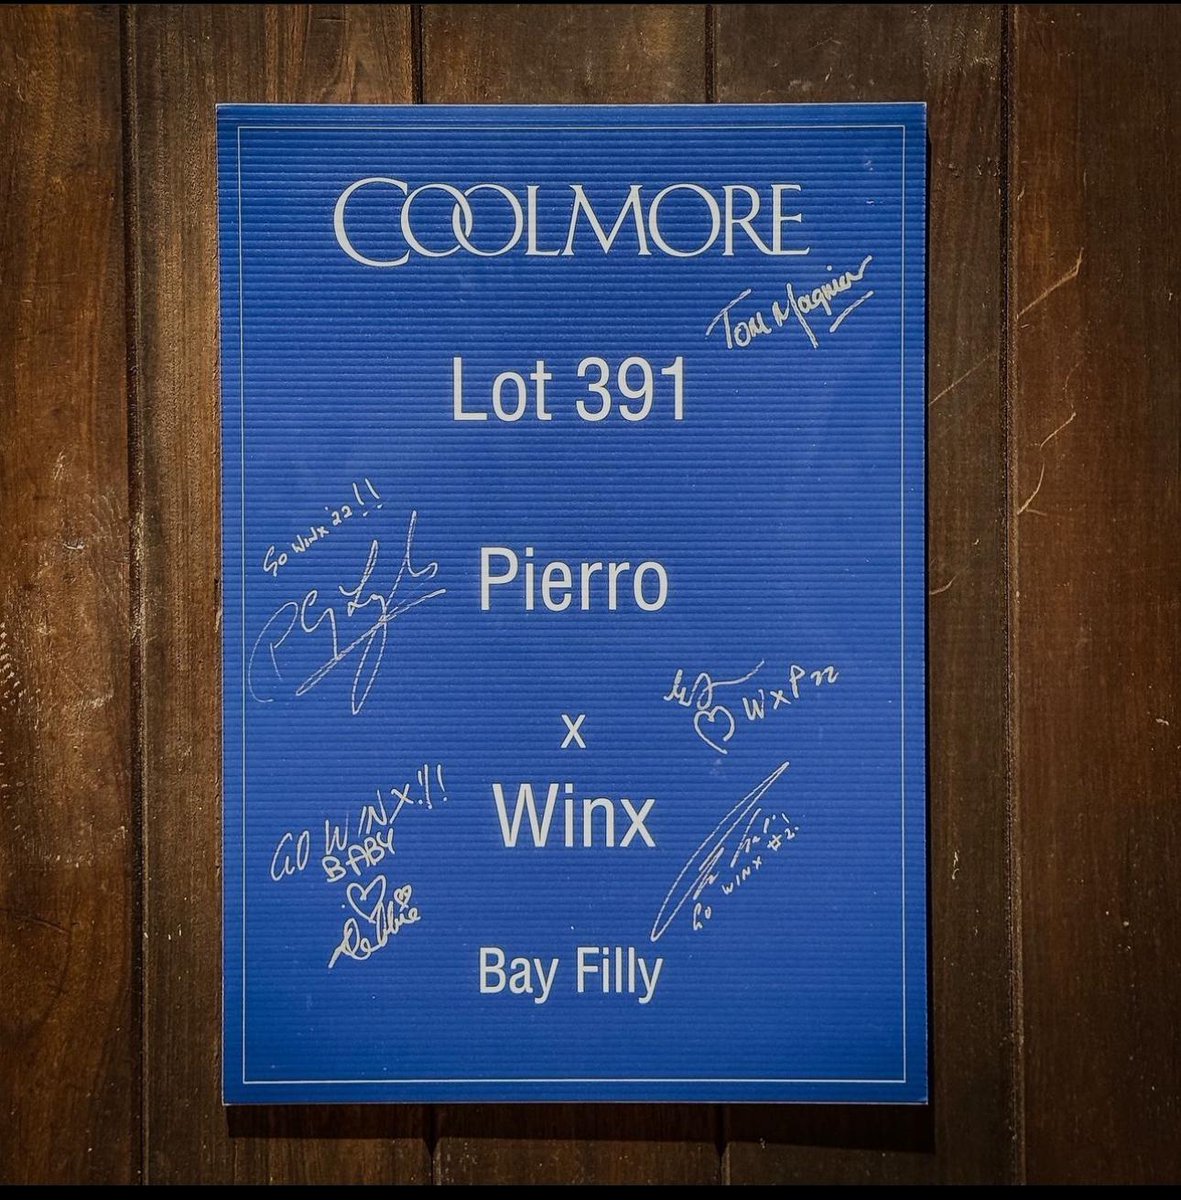 WIN the SIGNED Lot 391 Pierro x Winx door card! A piece of history could be yours to take home. Simply like this post and follow our page. Share this post and tag us for a bonus entry! We will pick a winner at random on Monday 8th April at 5pm. #Coolmore #HomeOfChampions #Winx